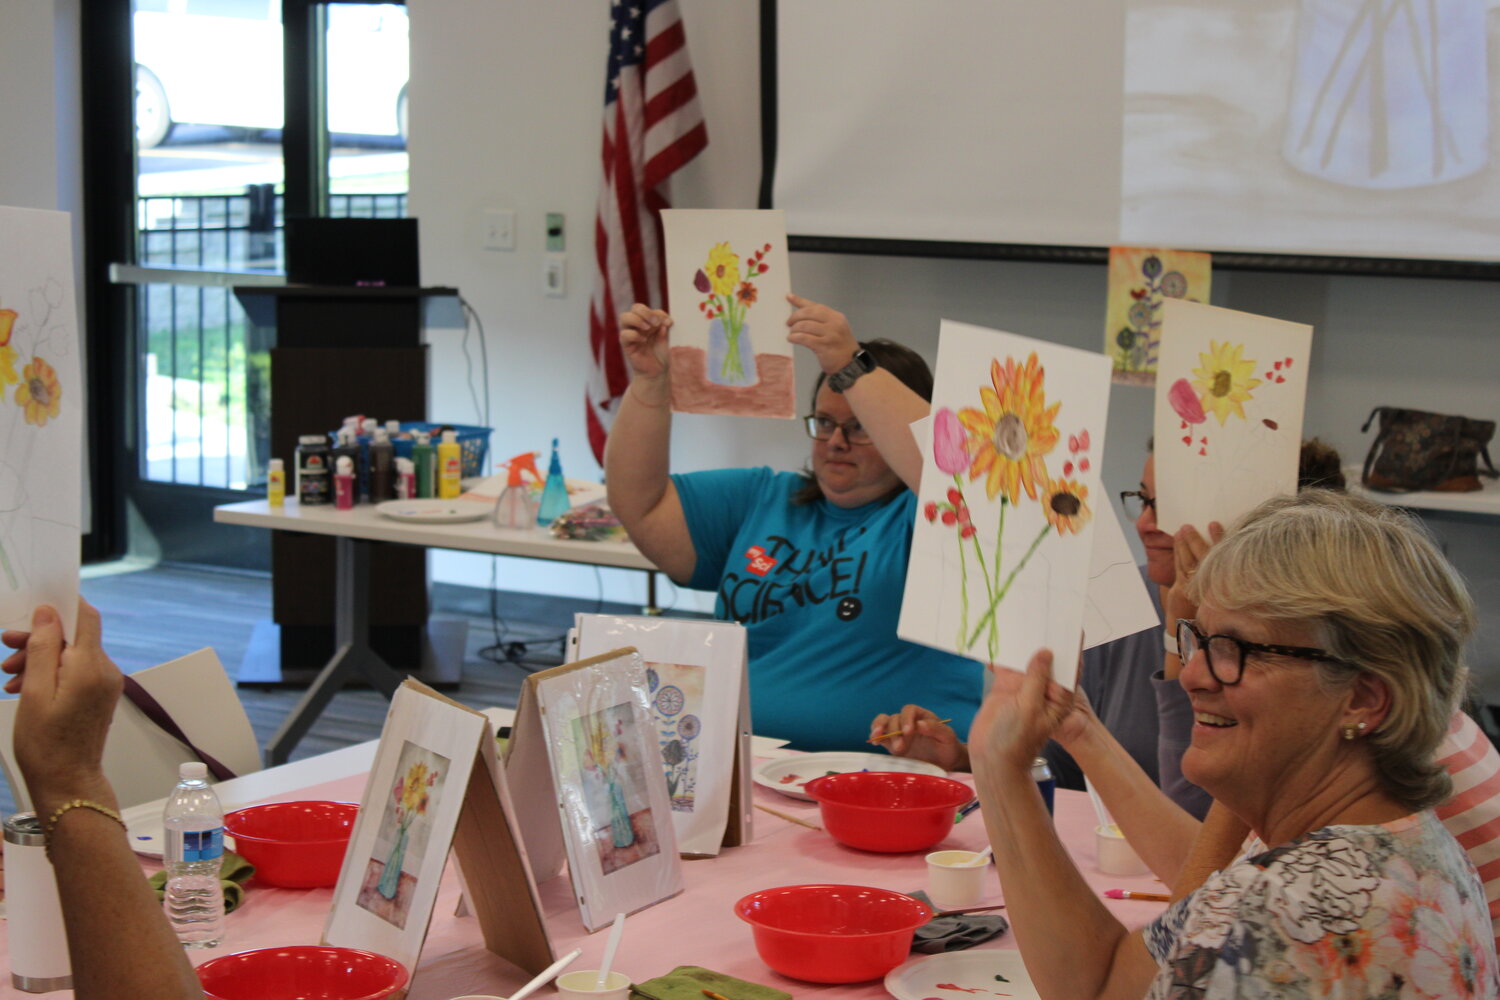 Hillary Edwards, Jaime Strauss, and Lisa Owenby hold up their partially finished paintings to show off their work to the rest of the watercolor painting group.